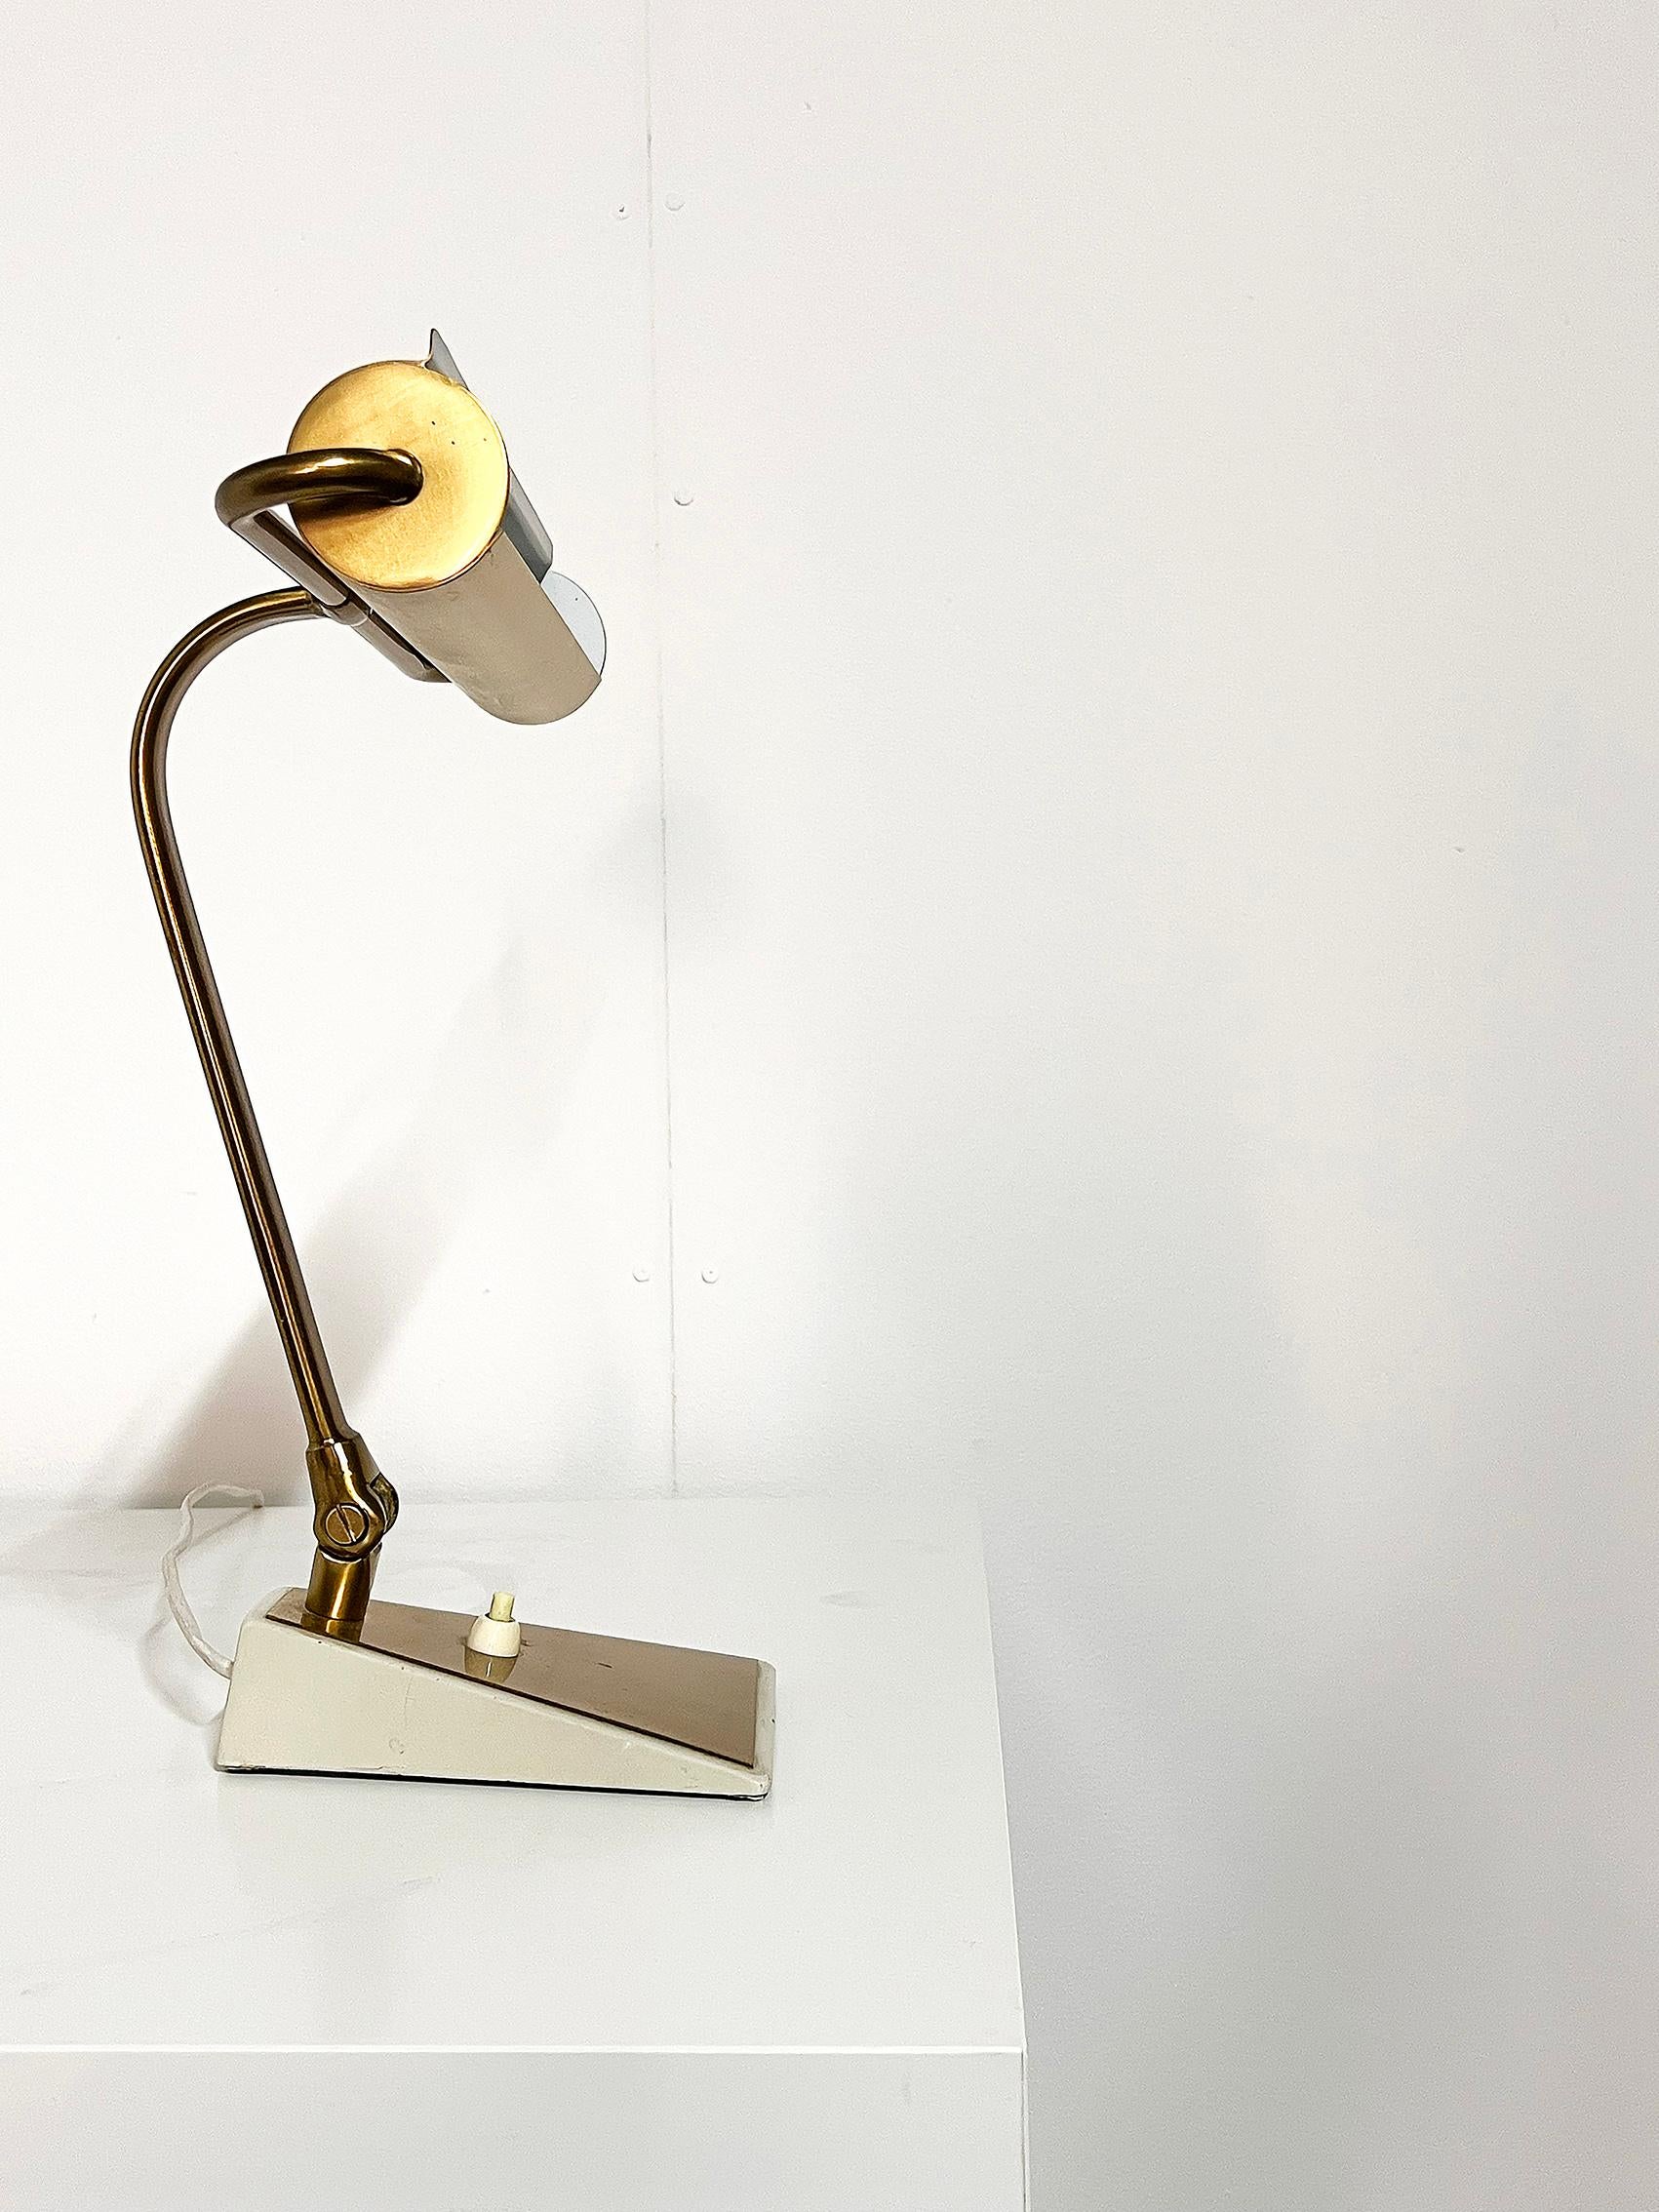 Scandinavian Modern Table Lamp in Brass by Boréns ca 1950-1960's For Sale 2